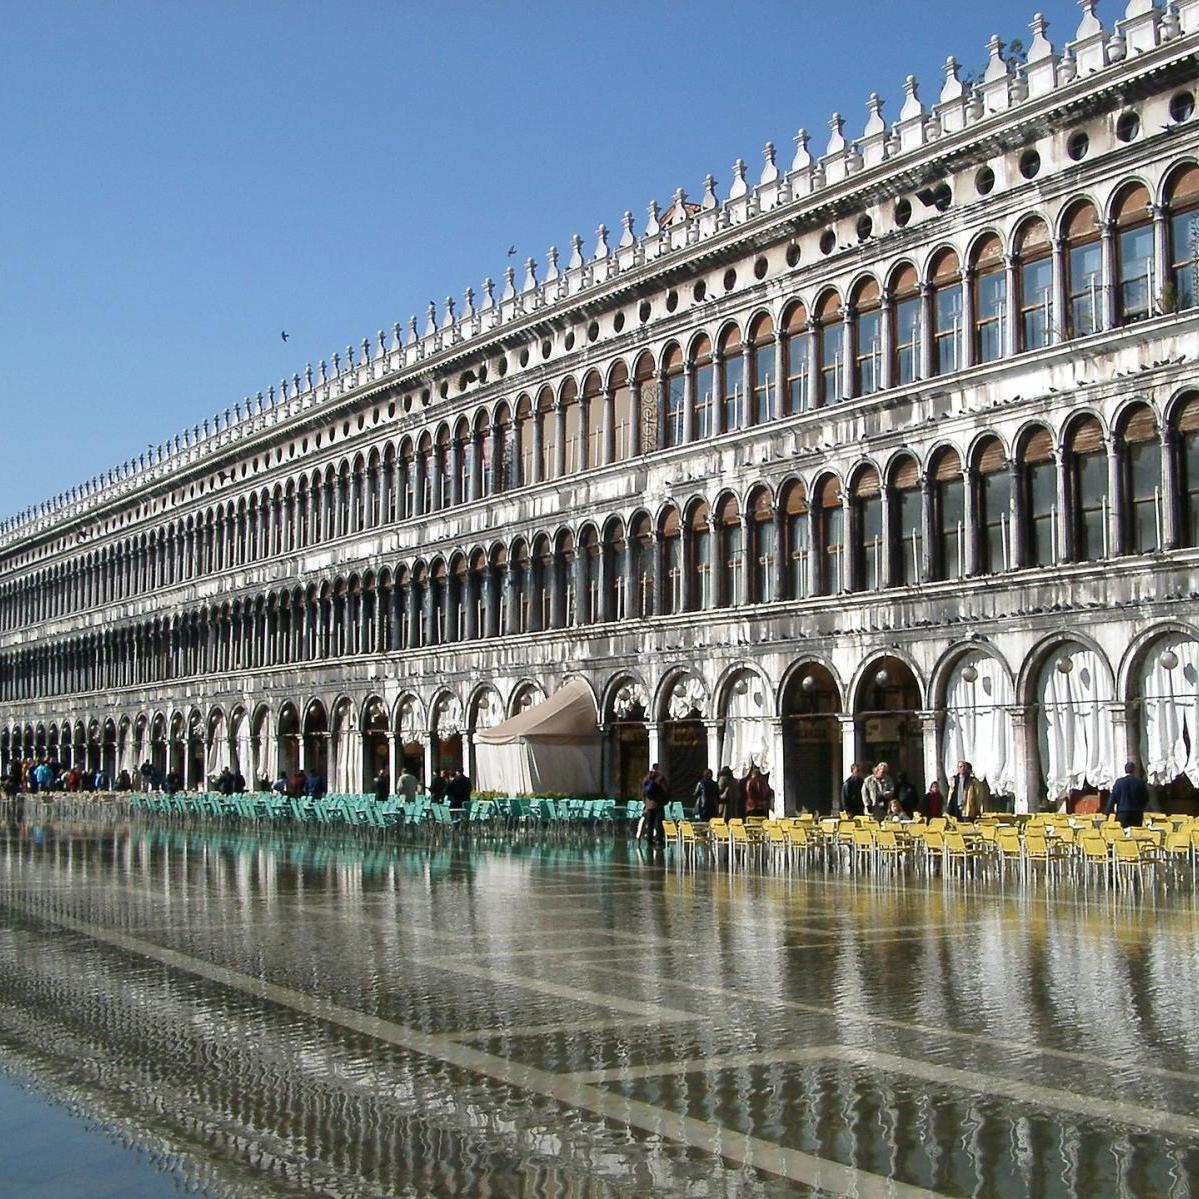 The Future of Venice: Between Disillusion and Fantasy - Opinion